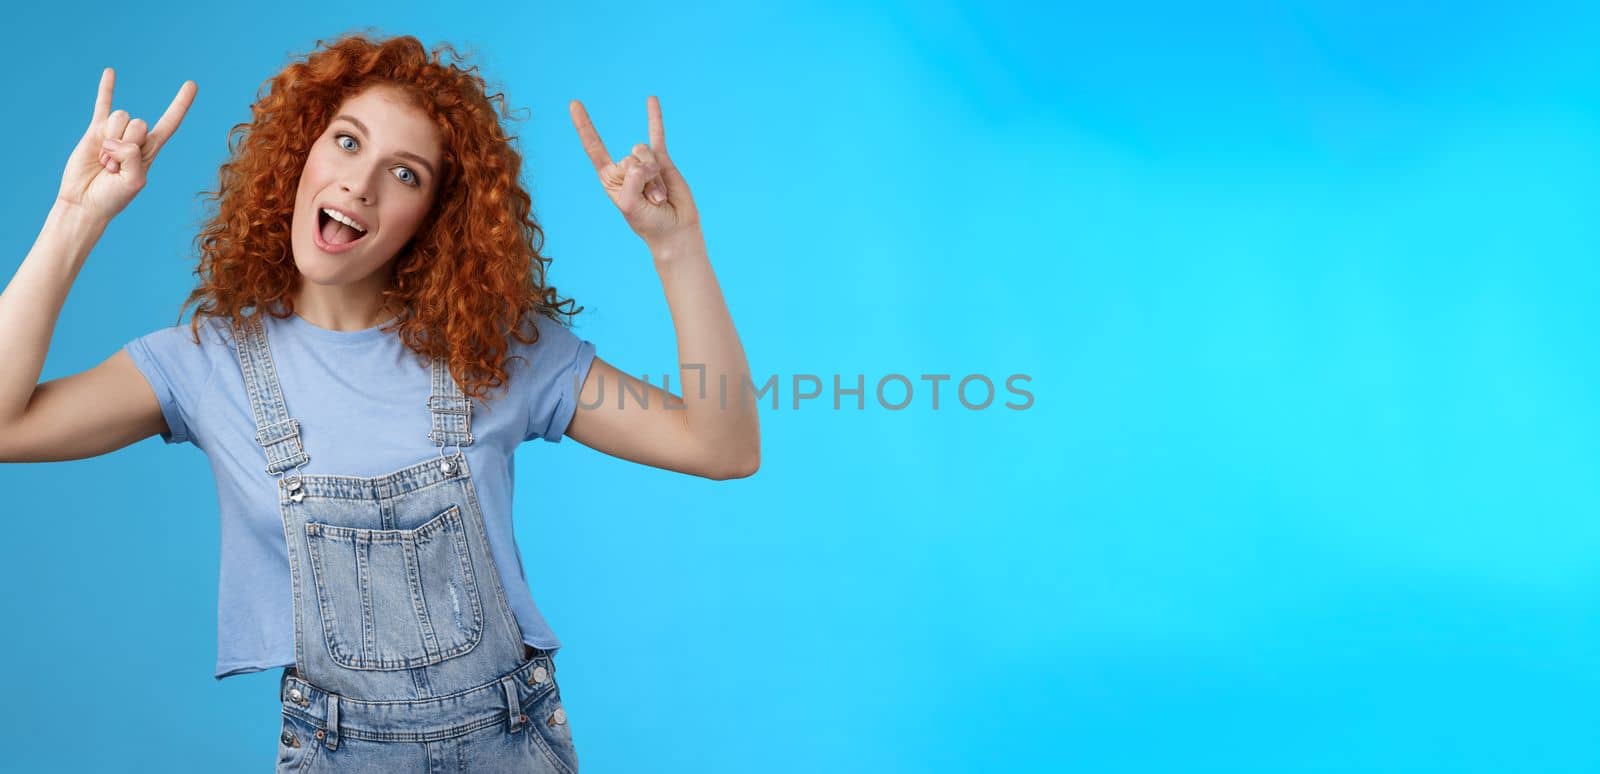 Lifestyle. Daring cool stylish awesome redhead cheerful curly-haired girl tilt head show tongue joyfully stare camera playful raise hands rock-n-roll heavy metal gesture having fun blue background.